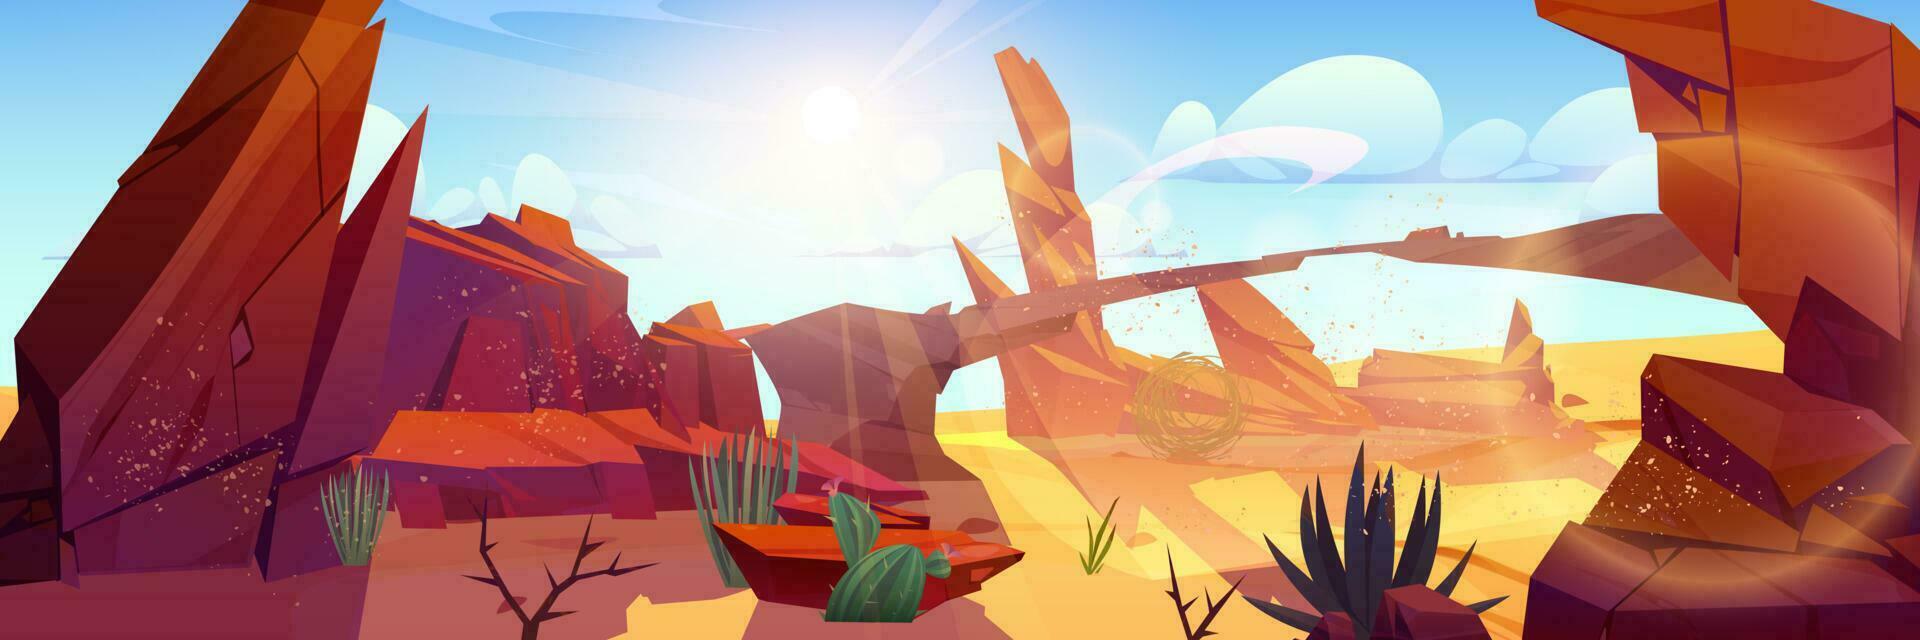 Rock and canyon in desert game cartoon landscape vector